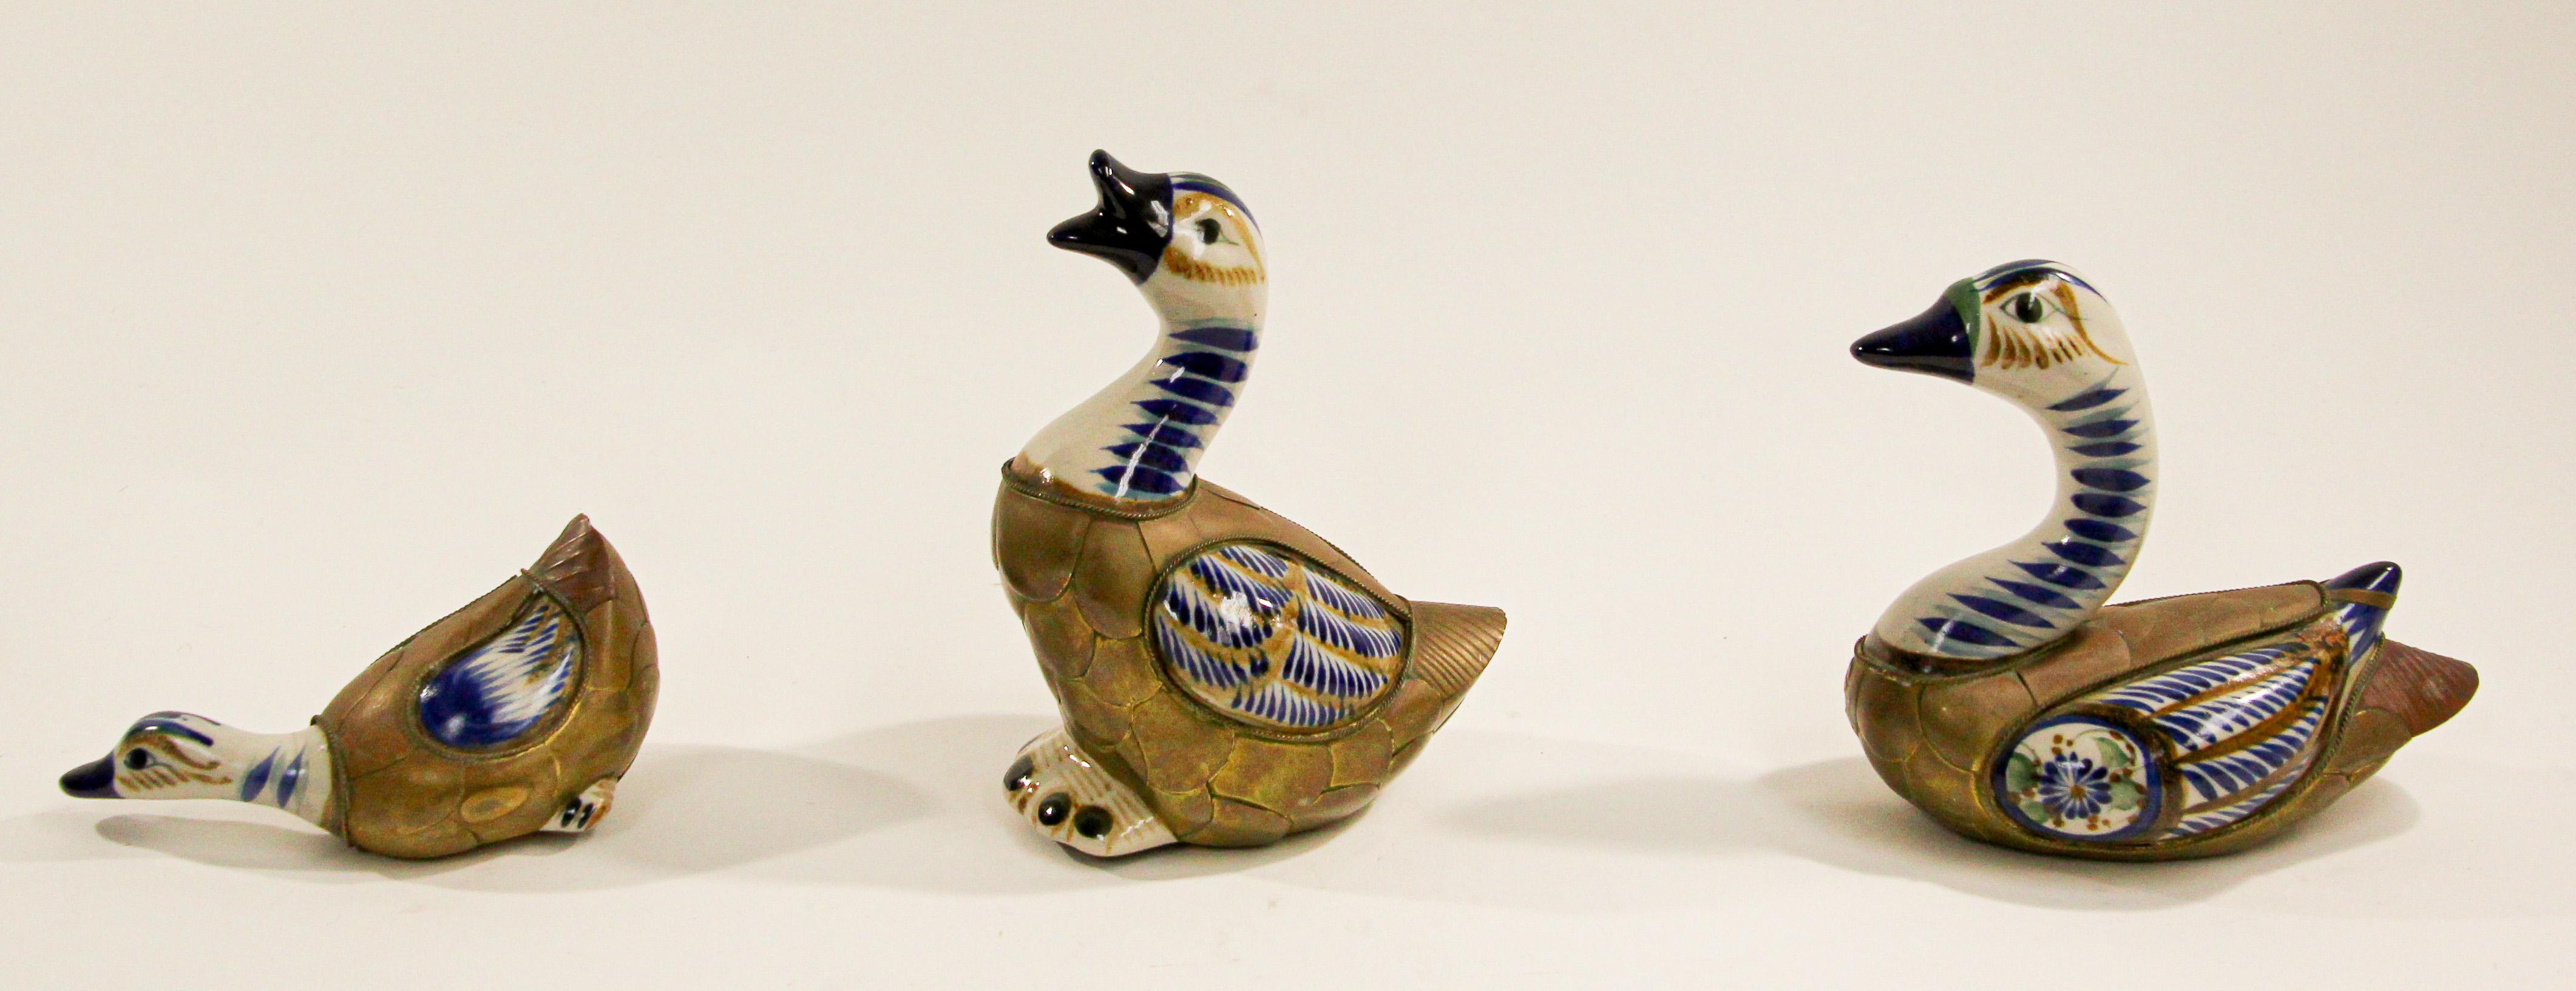 Mexican Hand Painted Colorful Tonala Pottery Ducks Set of Three In Good Condition For Sale In North Hollywood, CA